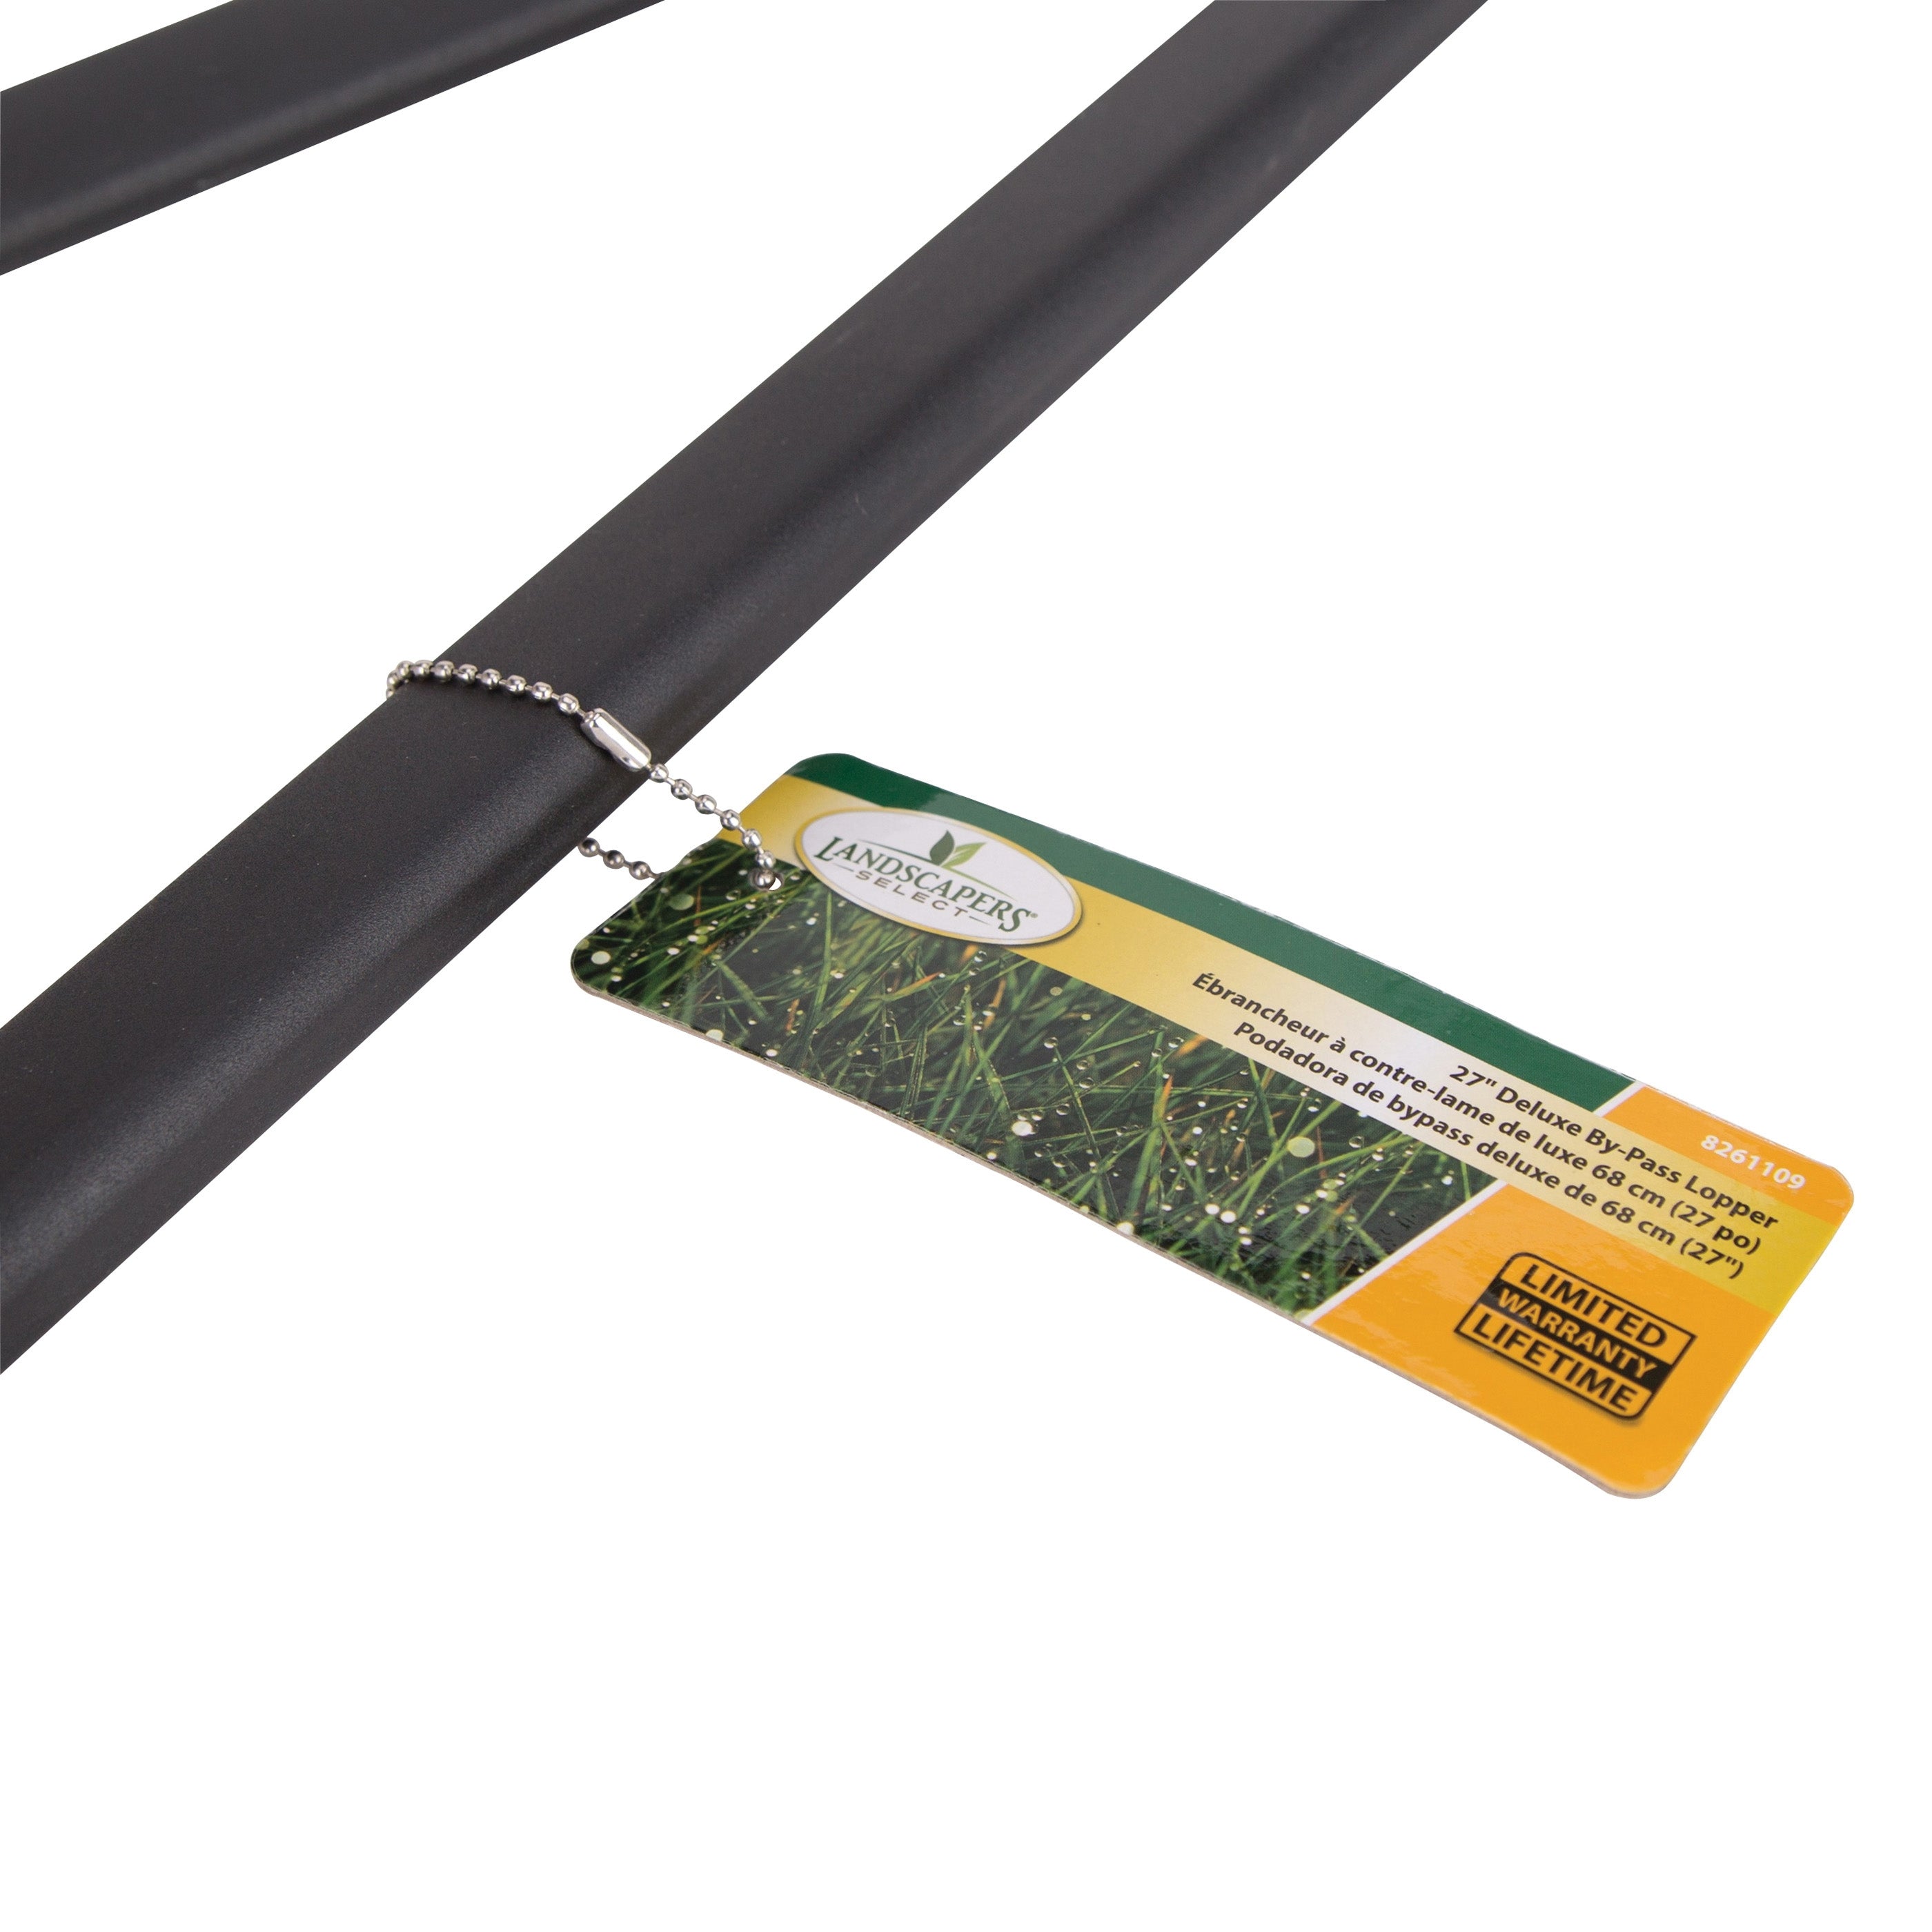 Landscapers Select Bypass Lopper - 27